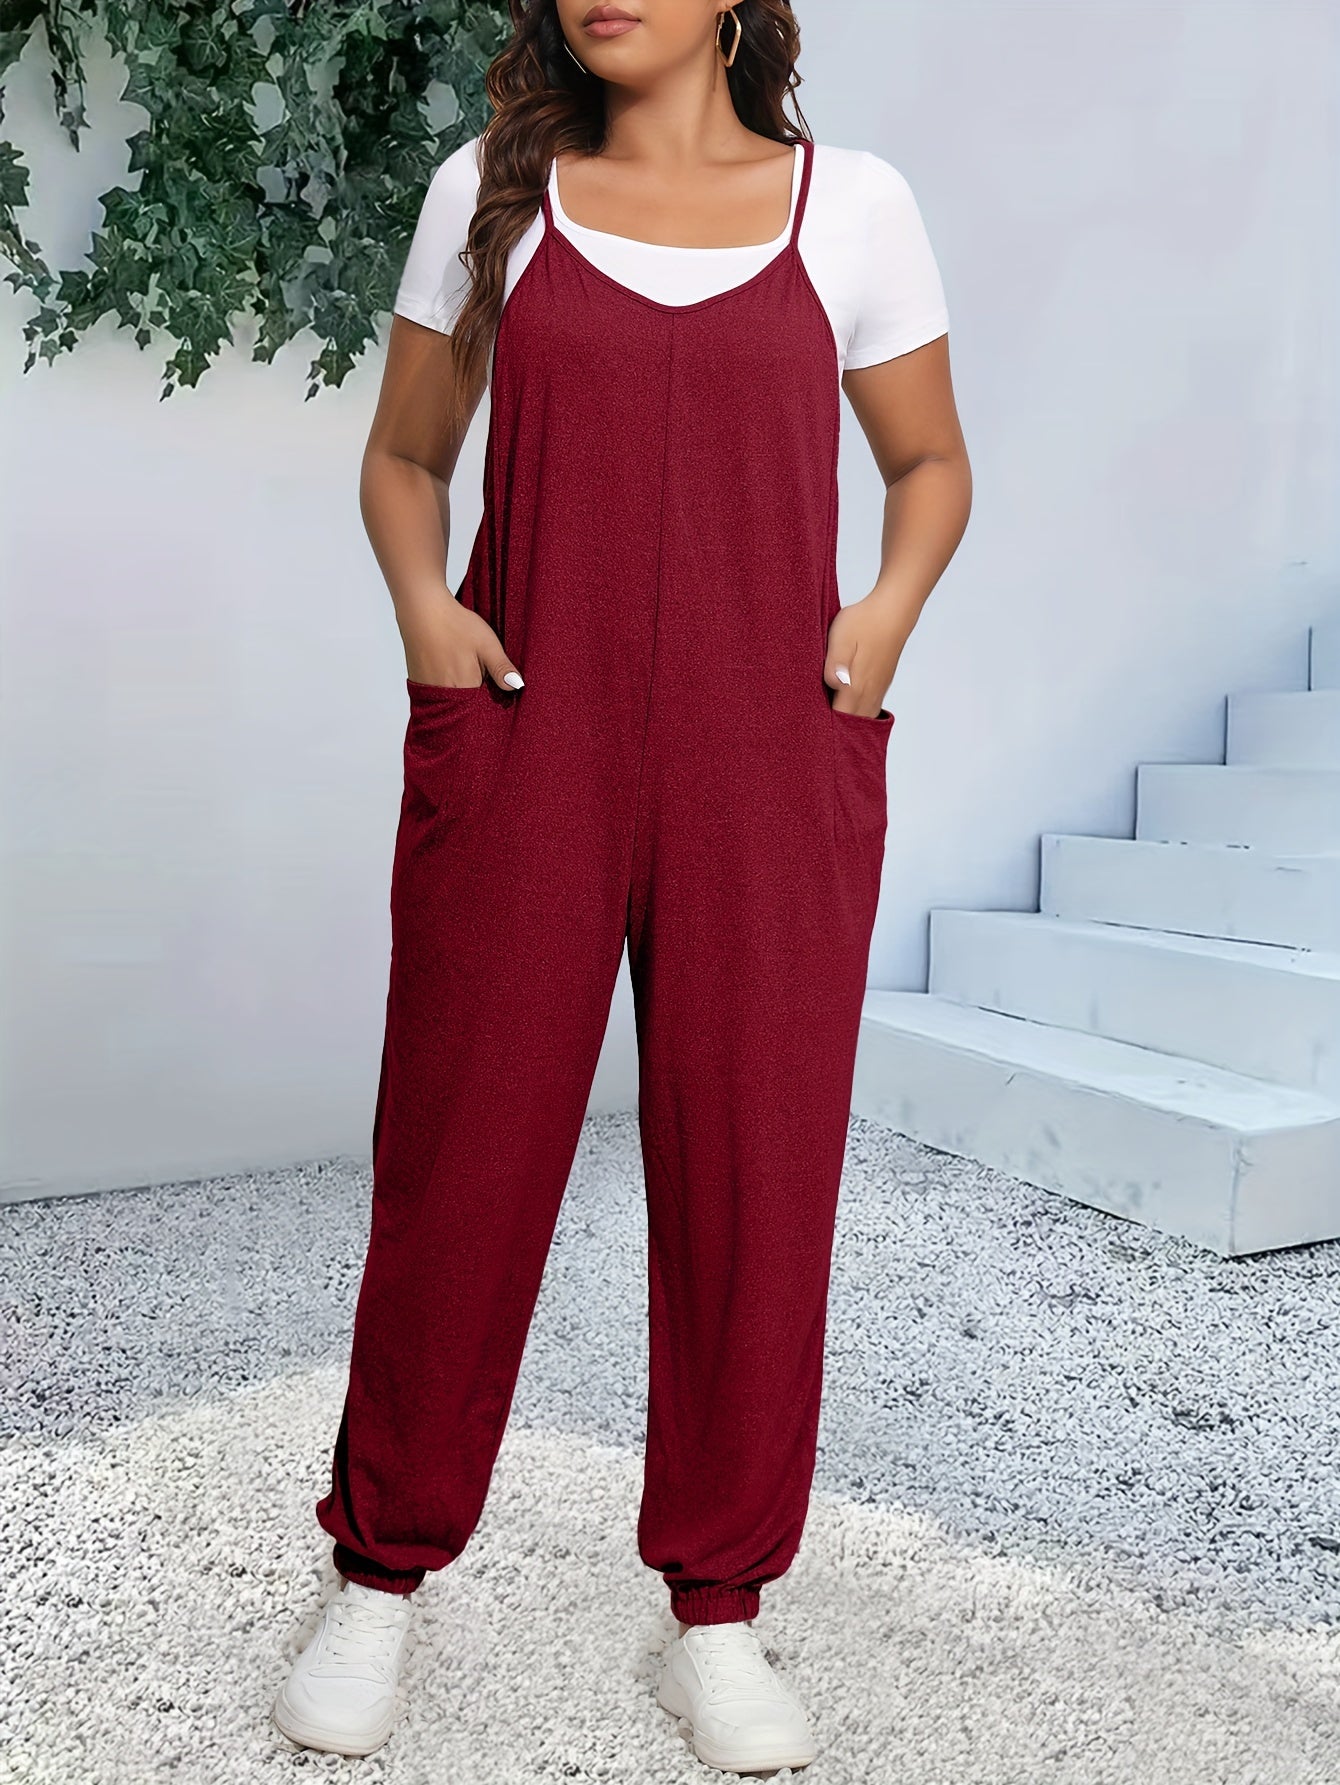 Plus Size Casual Cami Jumpsuit, Women's Plus Heathered V Neck Tapered Leg Cami Jumpsuit With Pockets